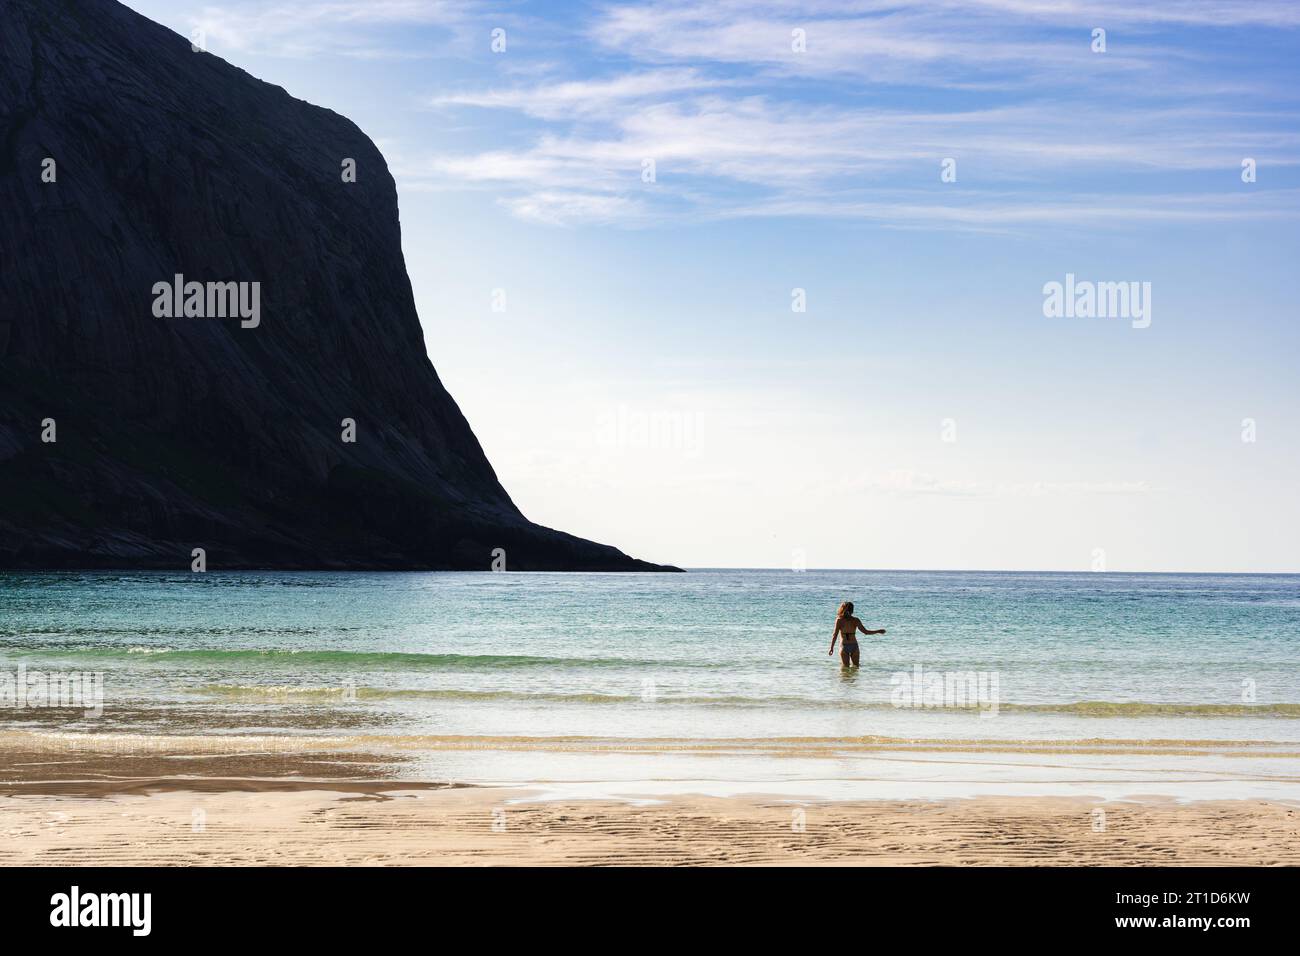 Woman in ocean water under large cliff Stock Photo